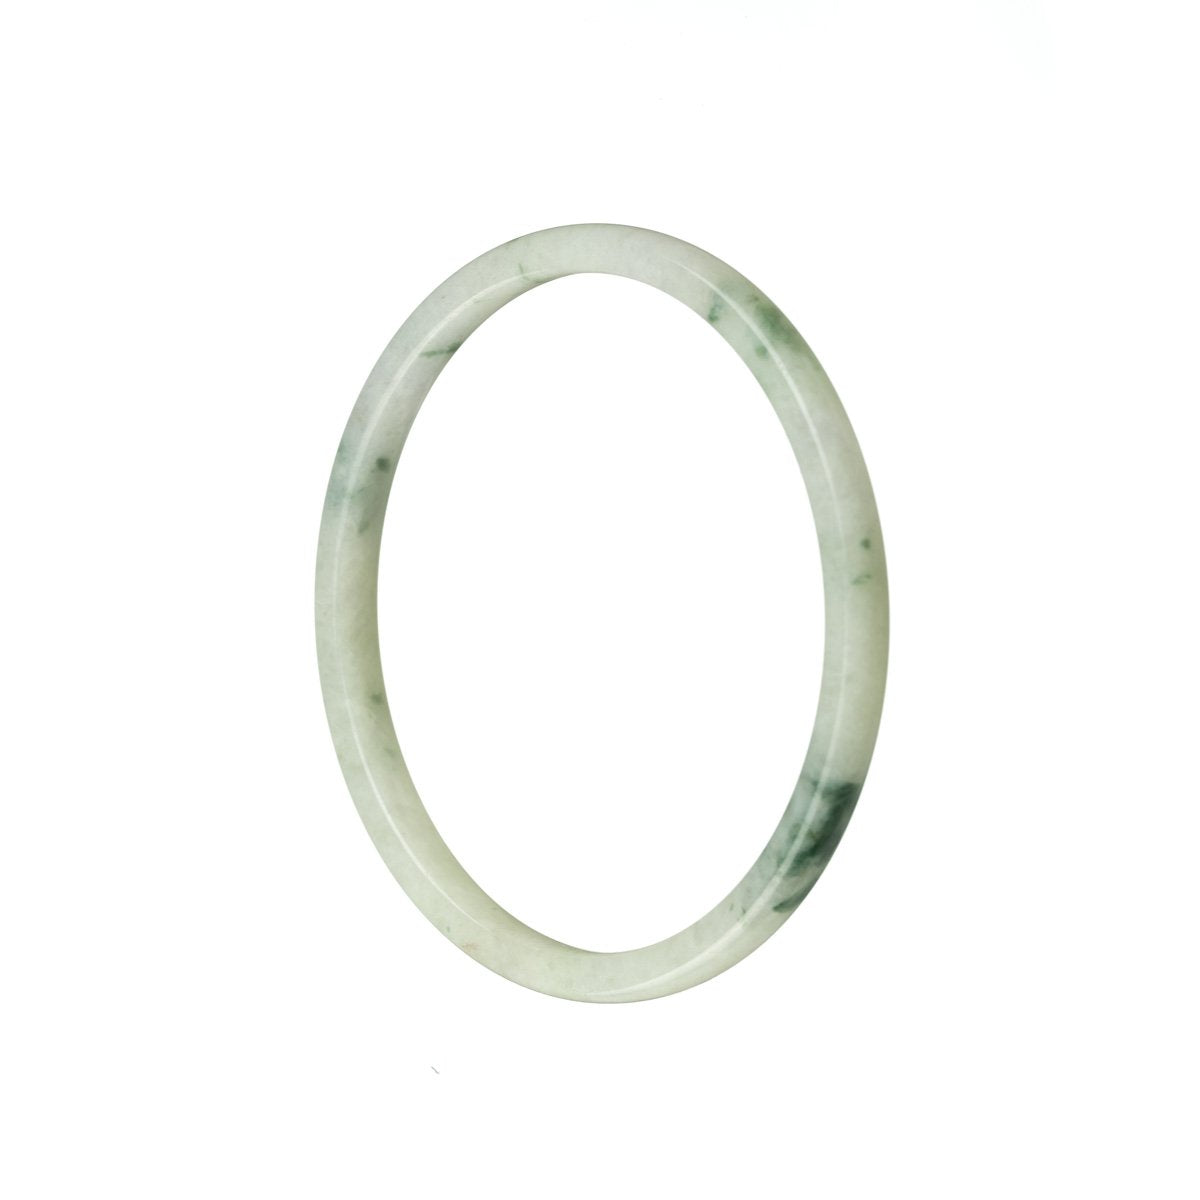 A light green Burma jade bangle bracelet, thin in size, with a real Type A designation.